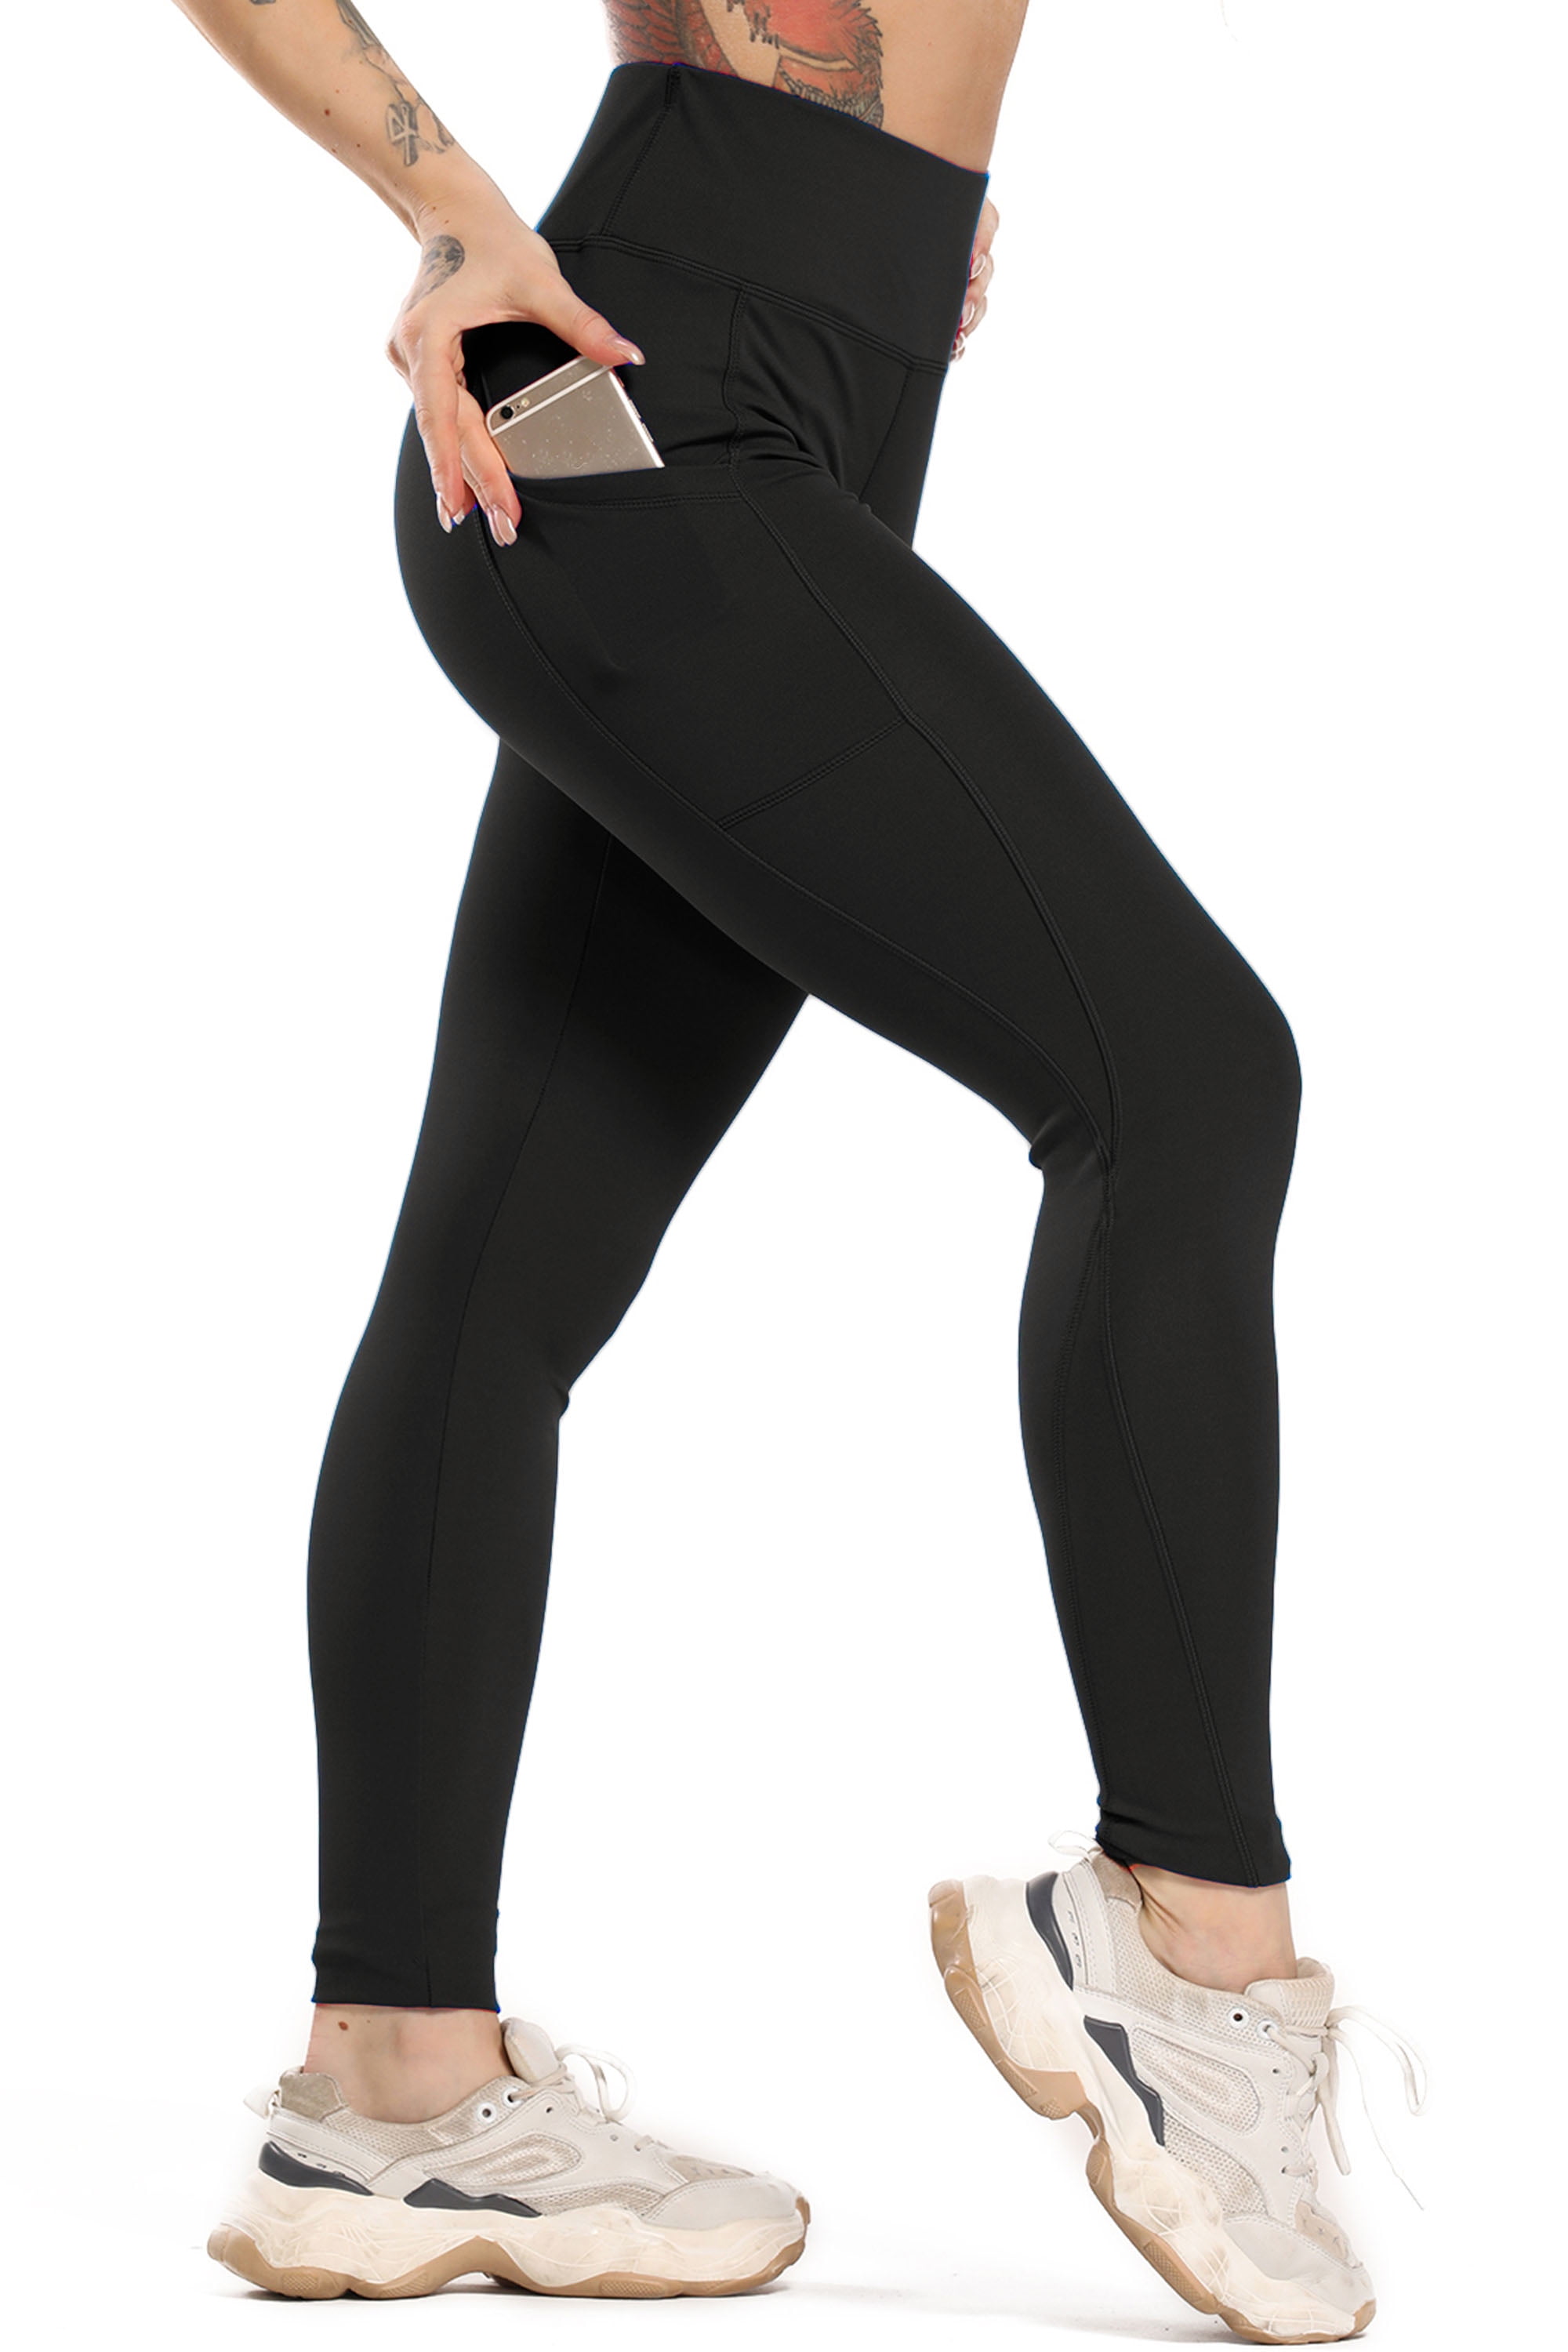 High Waist Yoga Pants with Pockets Workout Pants for Women 4 Way Stretch Running Yoga Leggings for Women